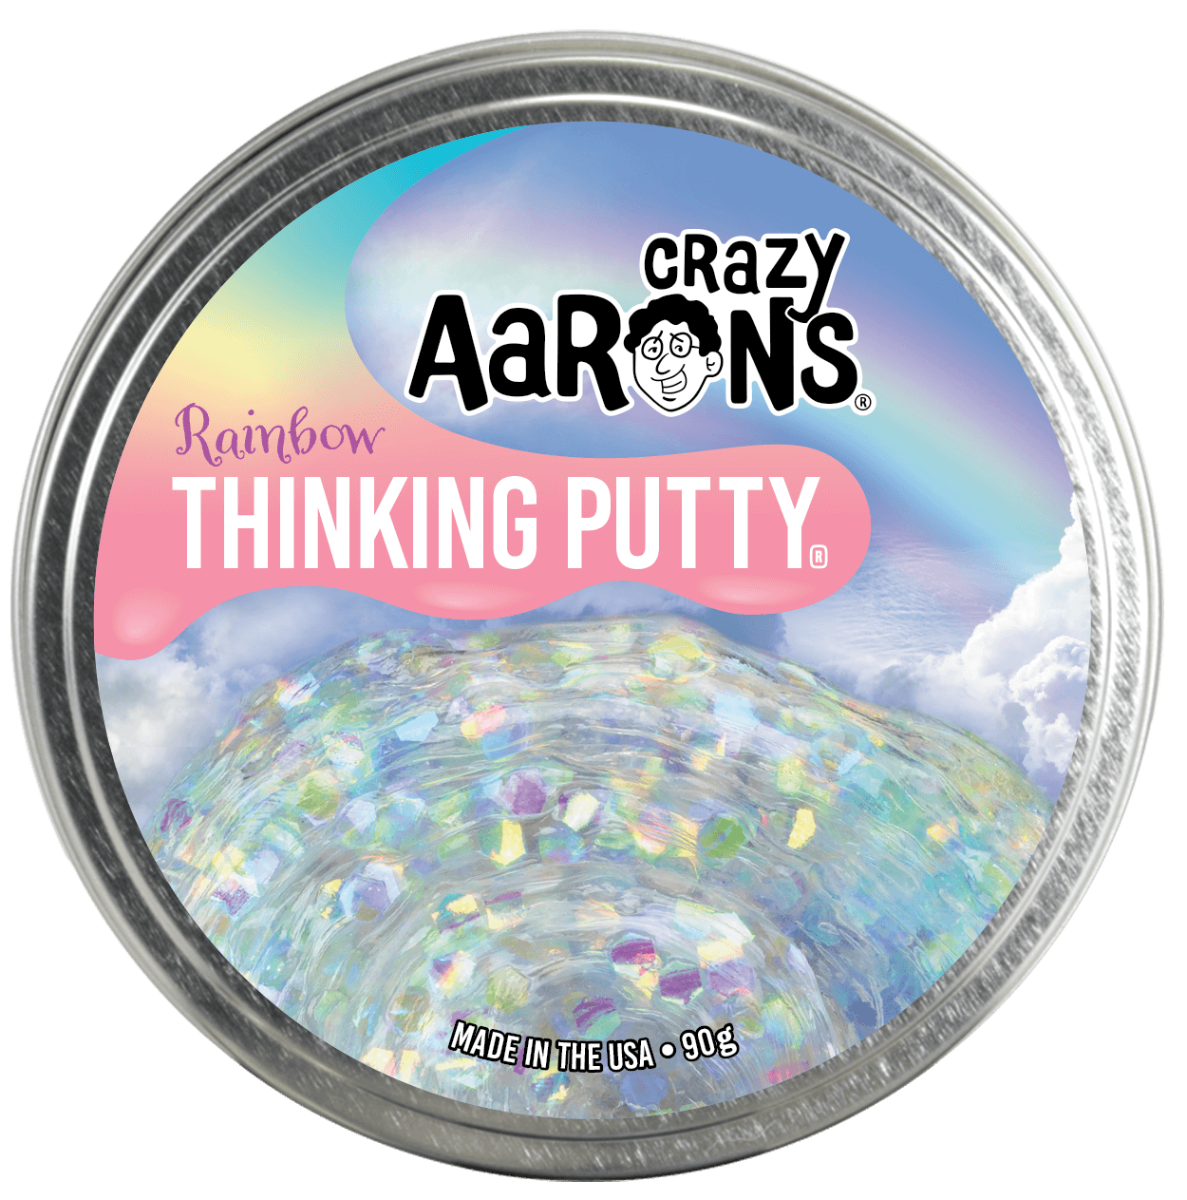 Crazy Aarons - Thinking Putty - Rainbow